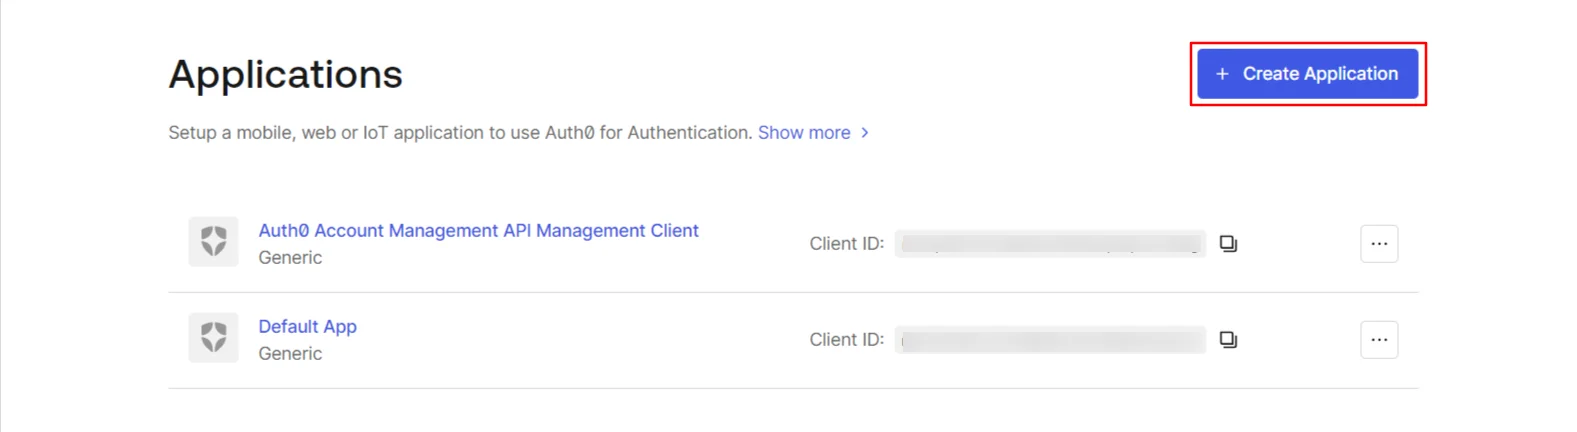 Create Application for Auth0 SSO Login